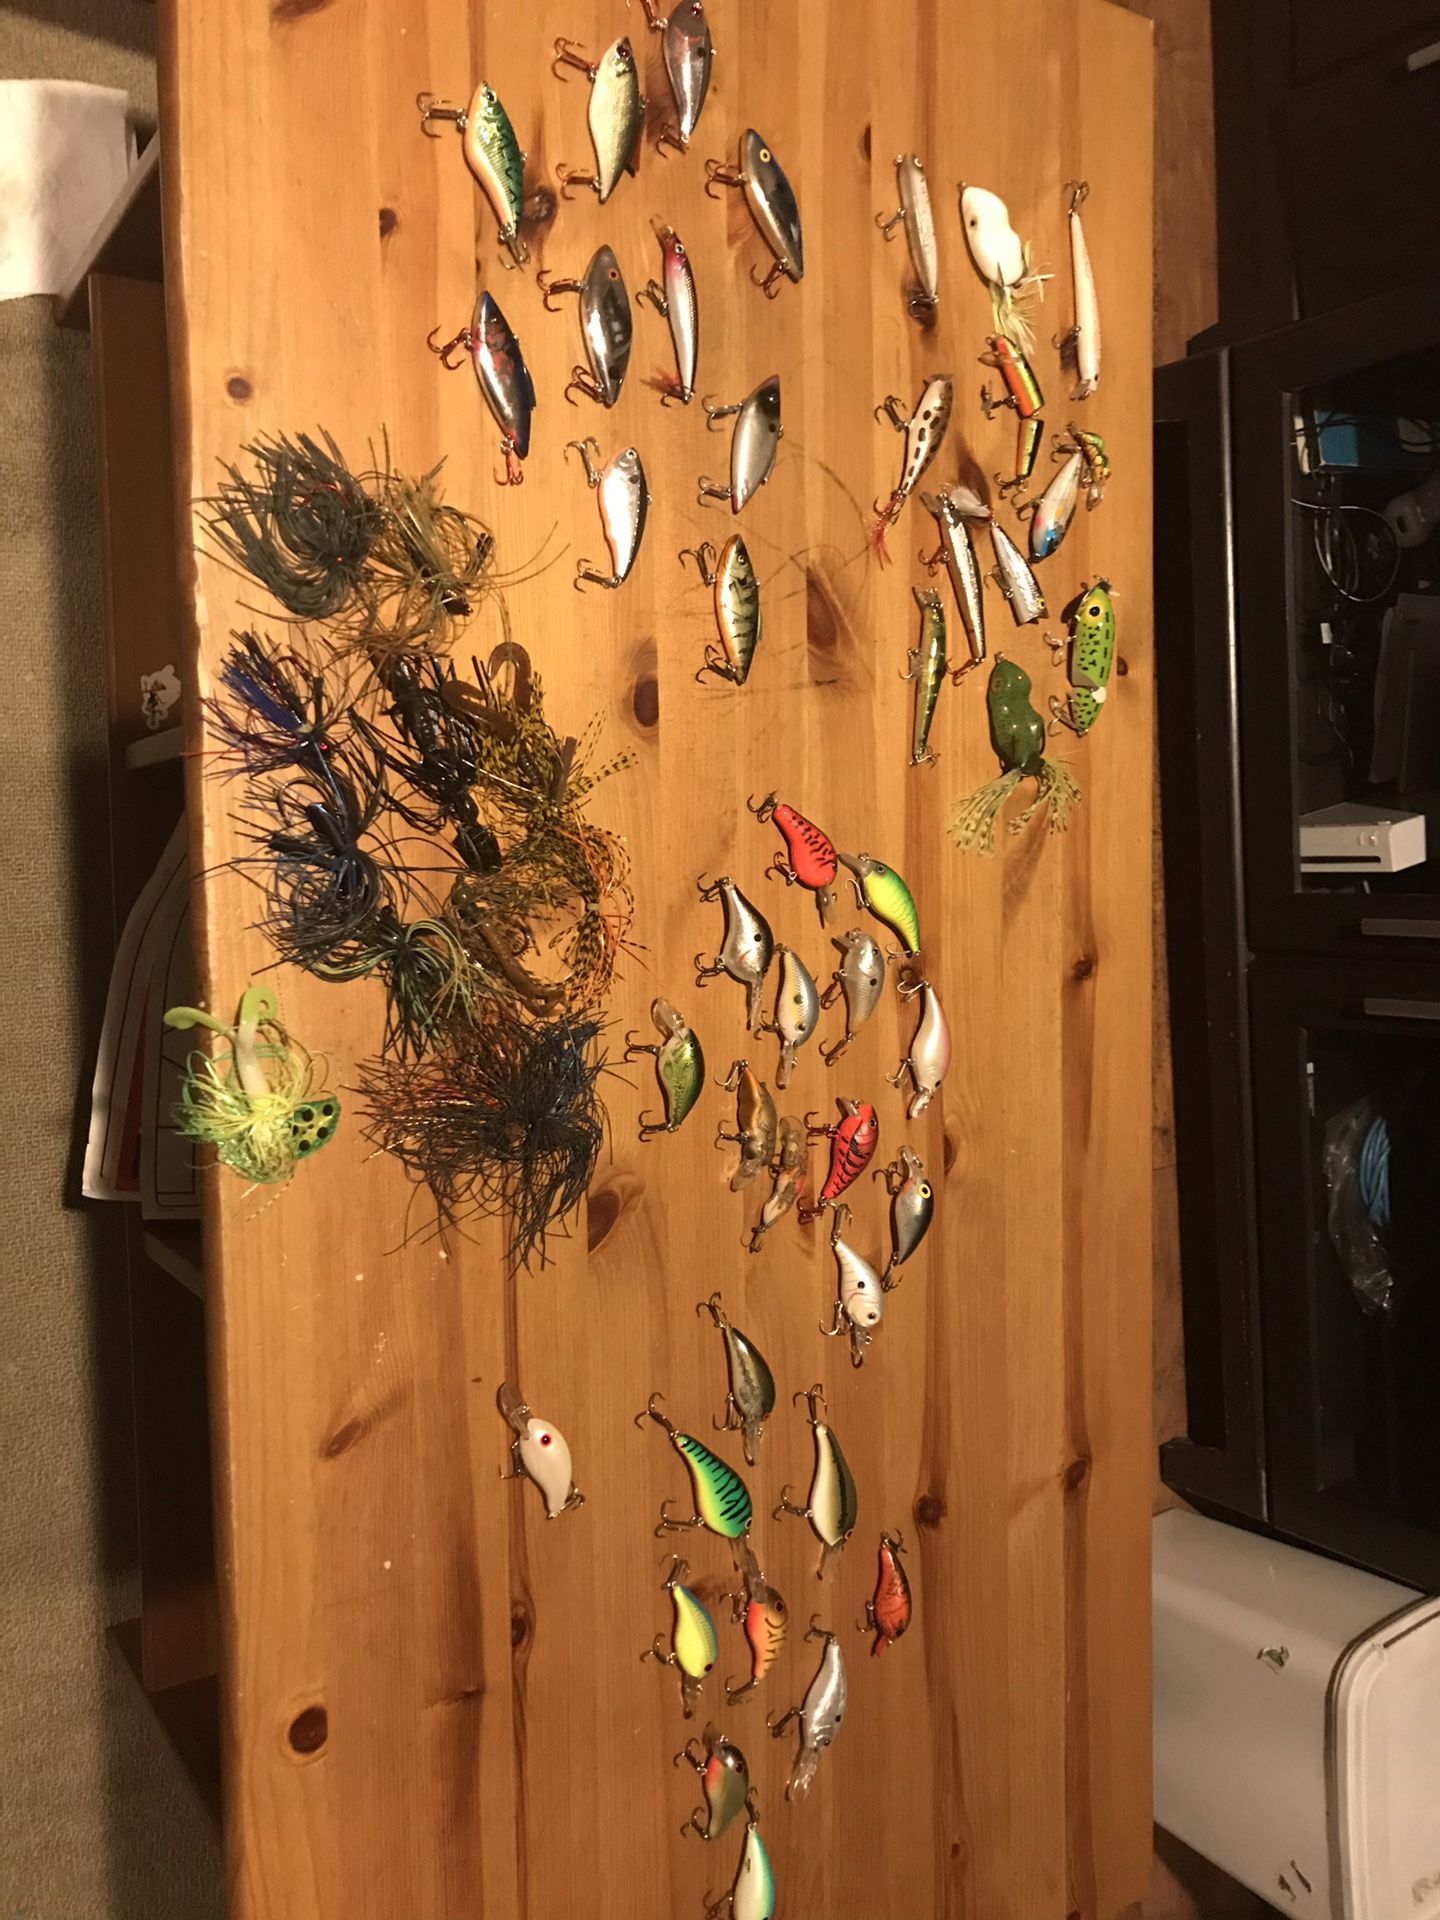 Fishing lure collection